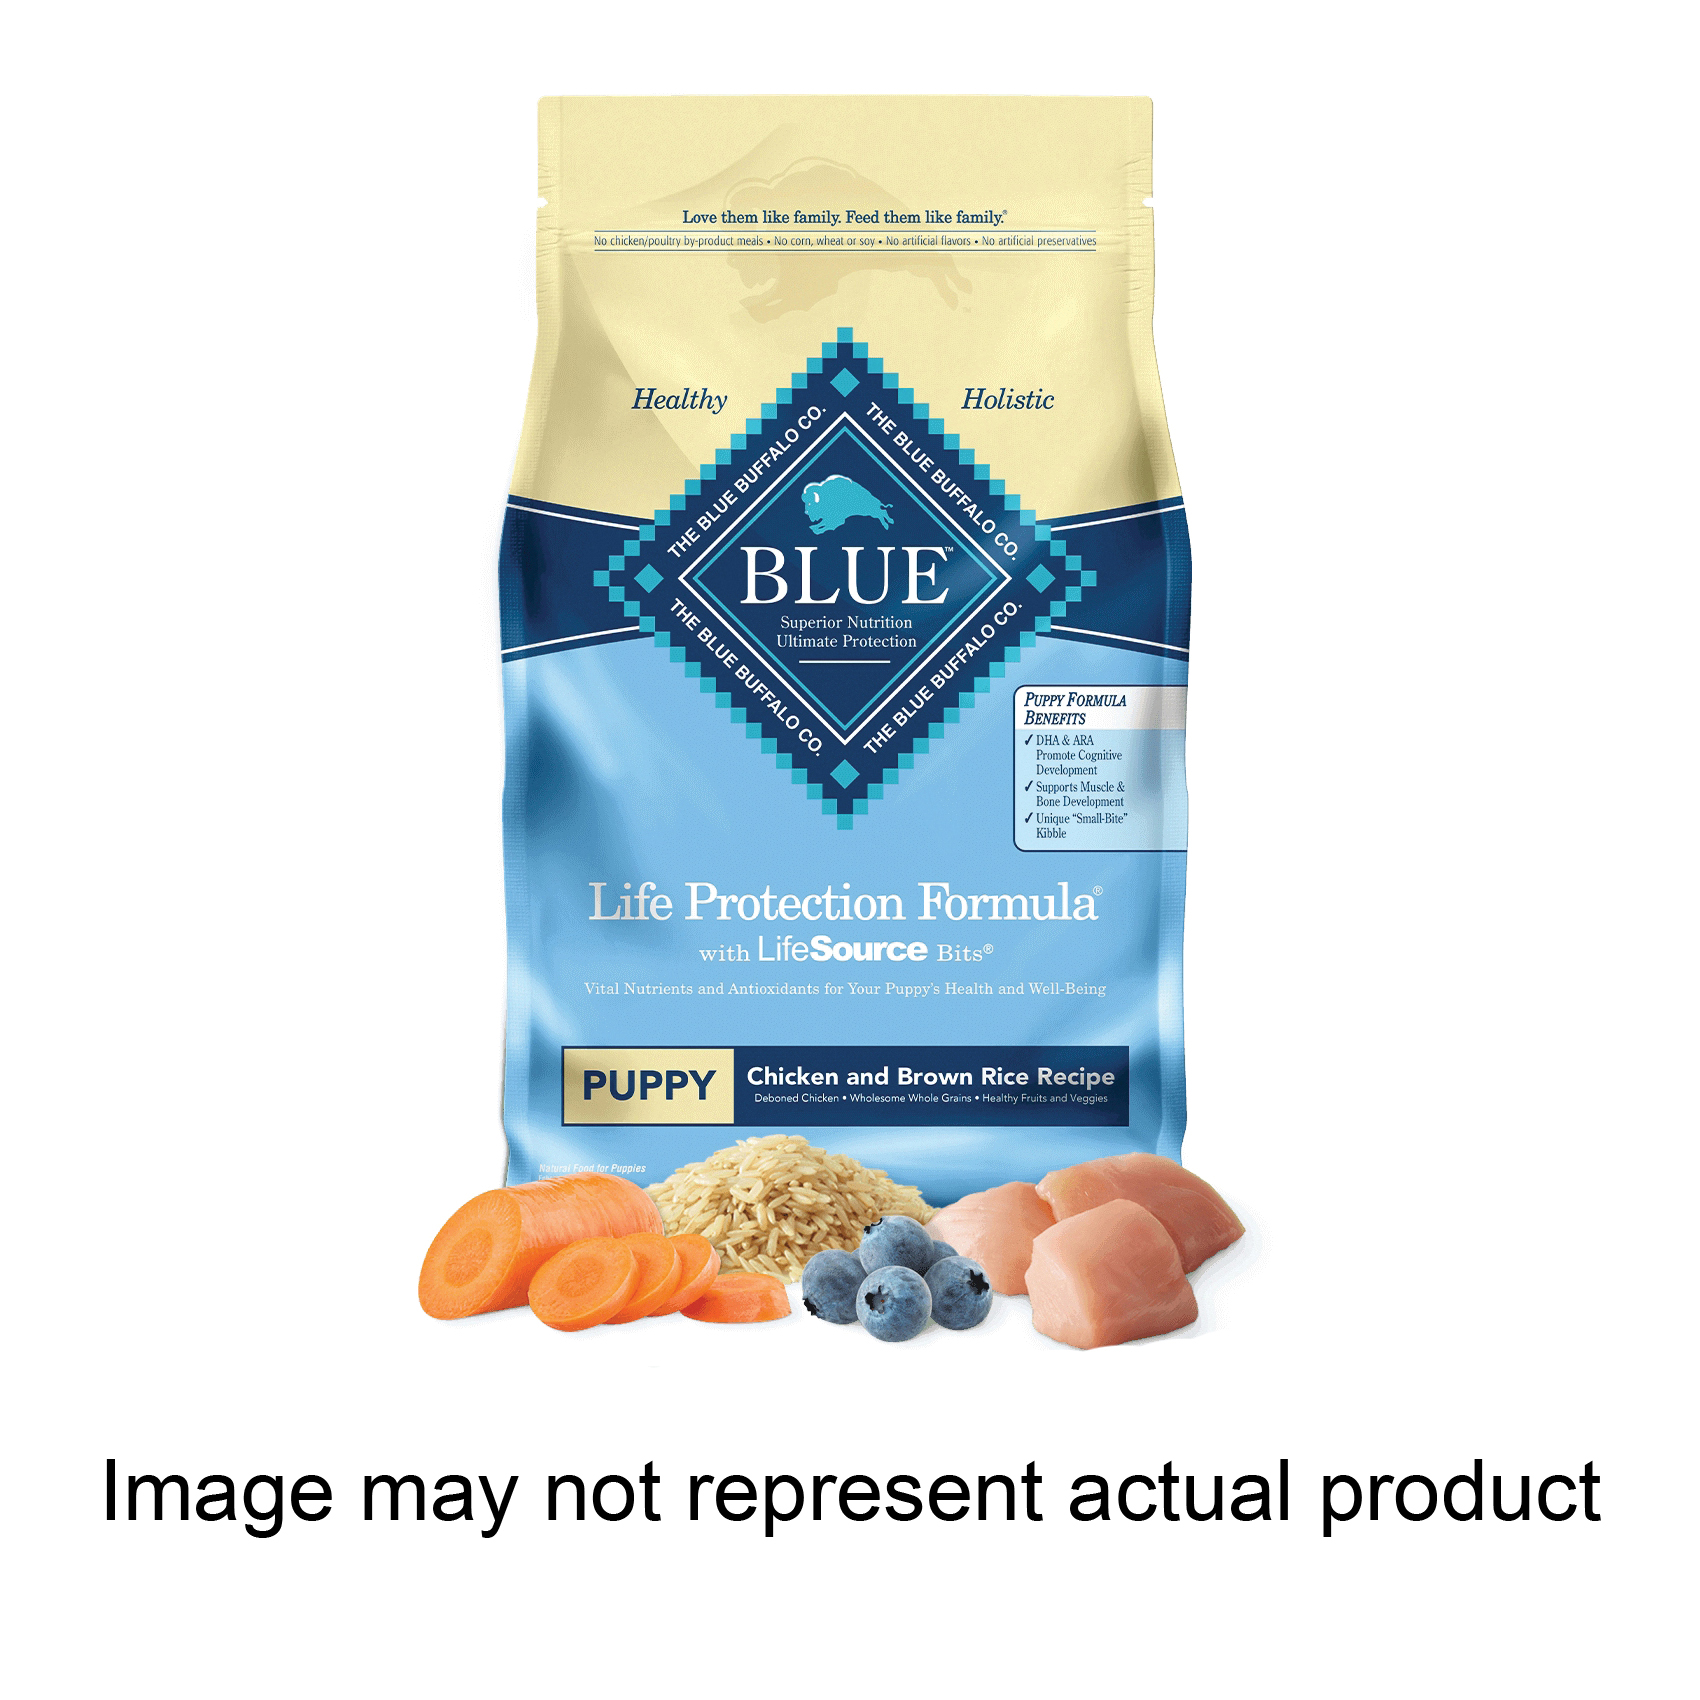 Blue Buffalo Life Protection Formula 800146 Dog Food, Puppy Breed, Dry, Brown Rice, Chicken Flavor, 6 lb Bag